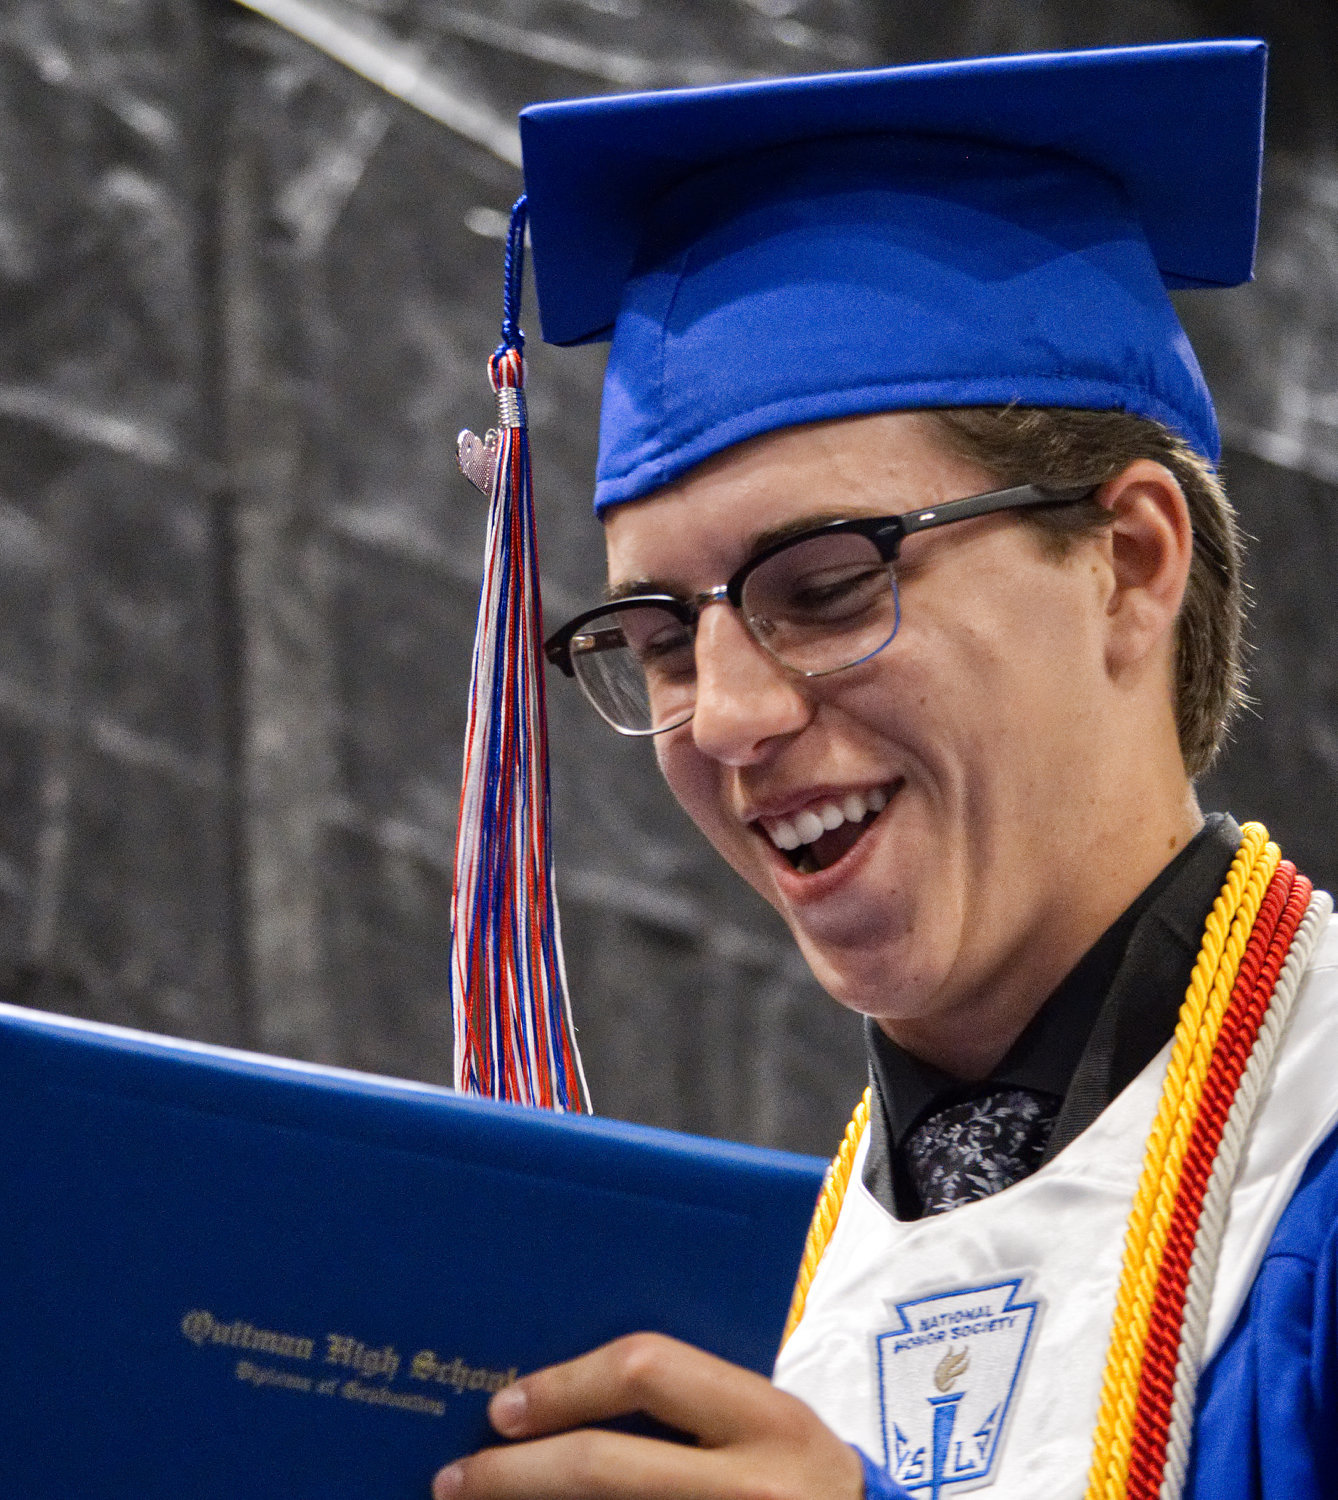 Jacob Day reacts to receiving his diploma at Quitman High School graduation.